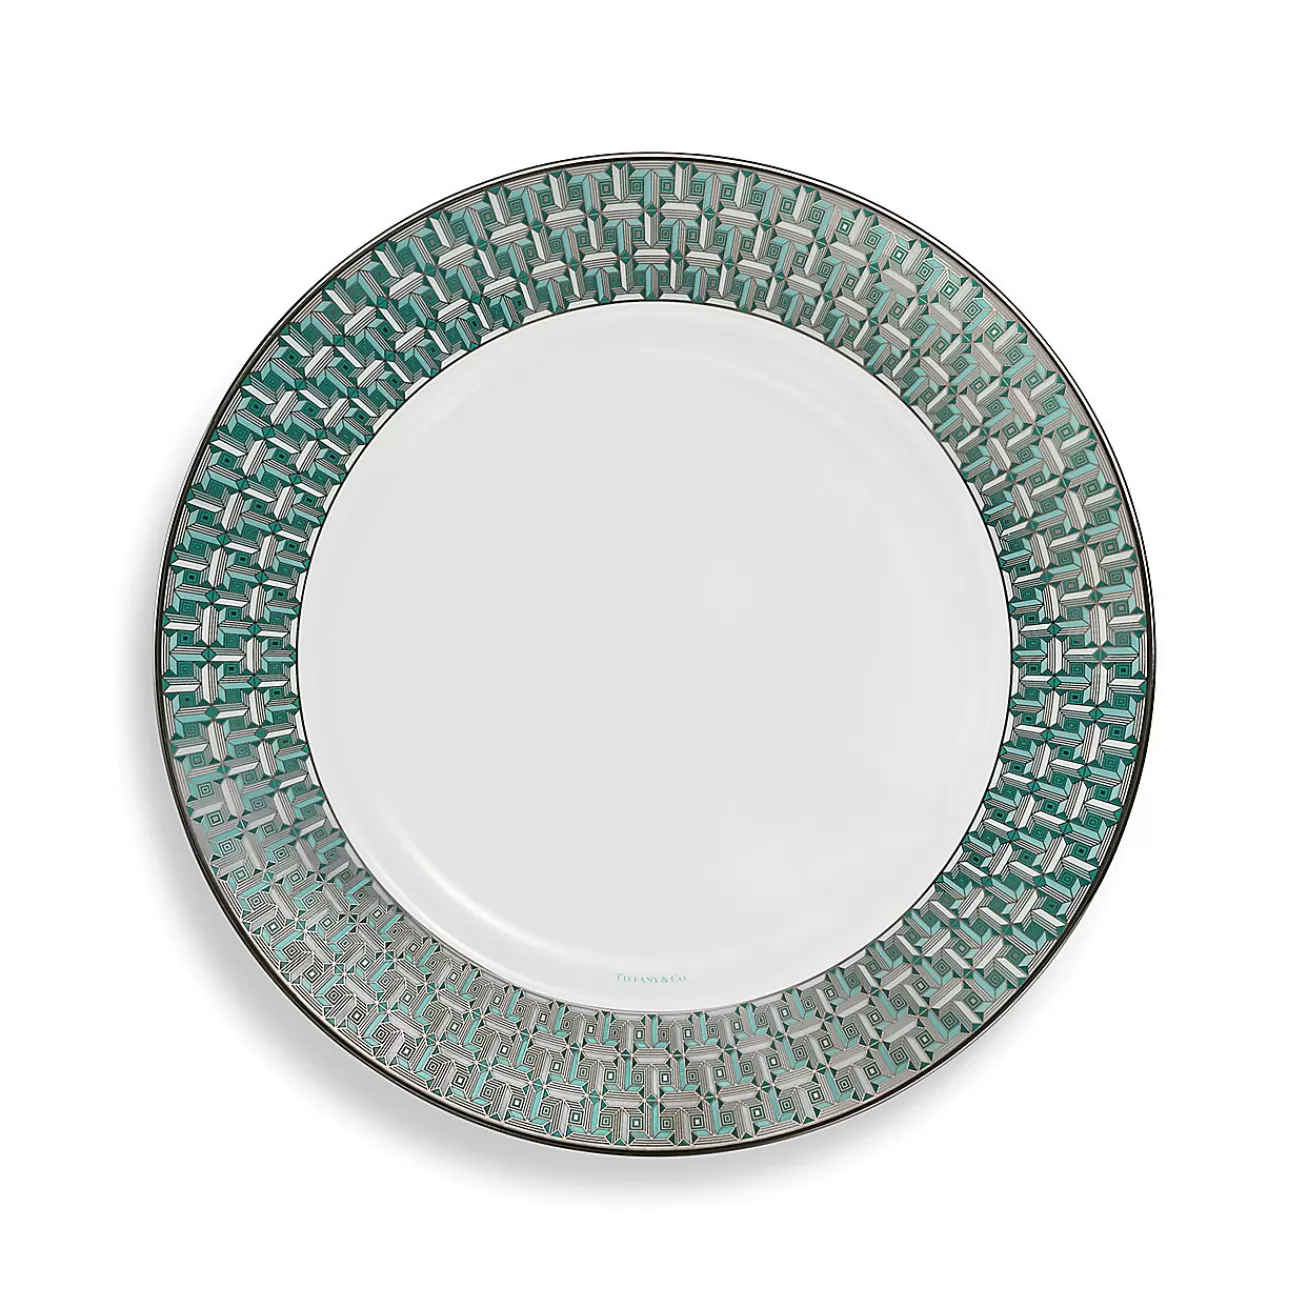 Tiffany & Co. Tiffany T True Dinner Plate with a Hand-painted Platinum Rim | ^ The Home | Housewarming Gifts